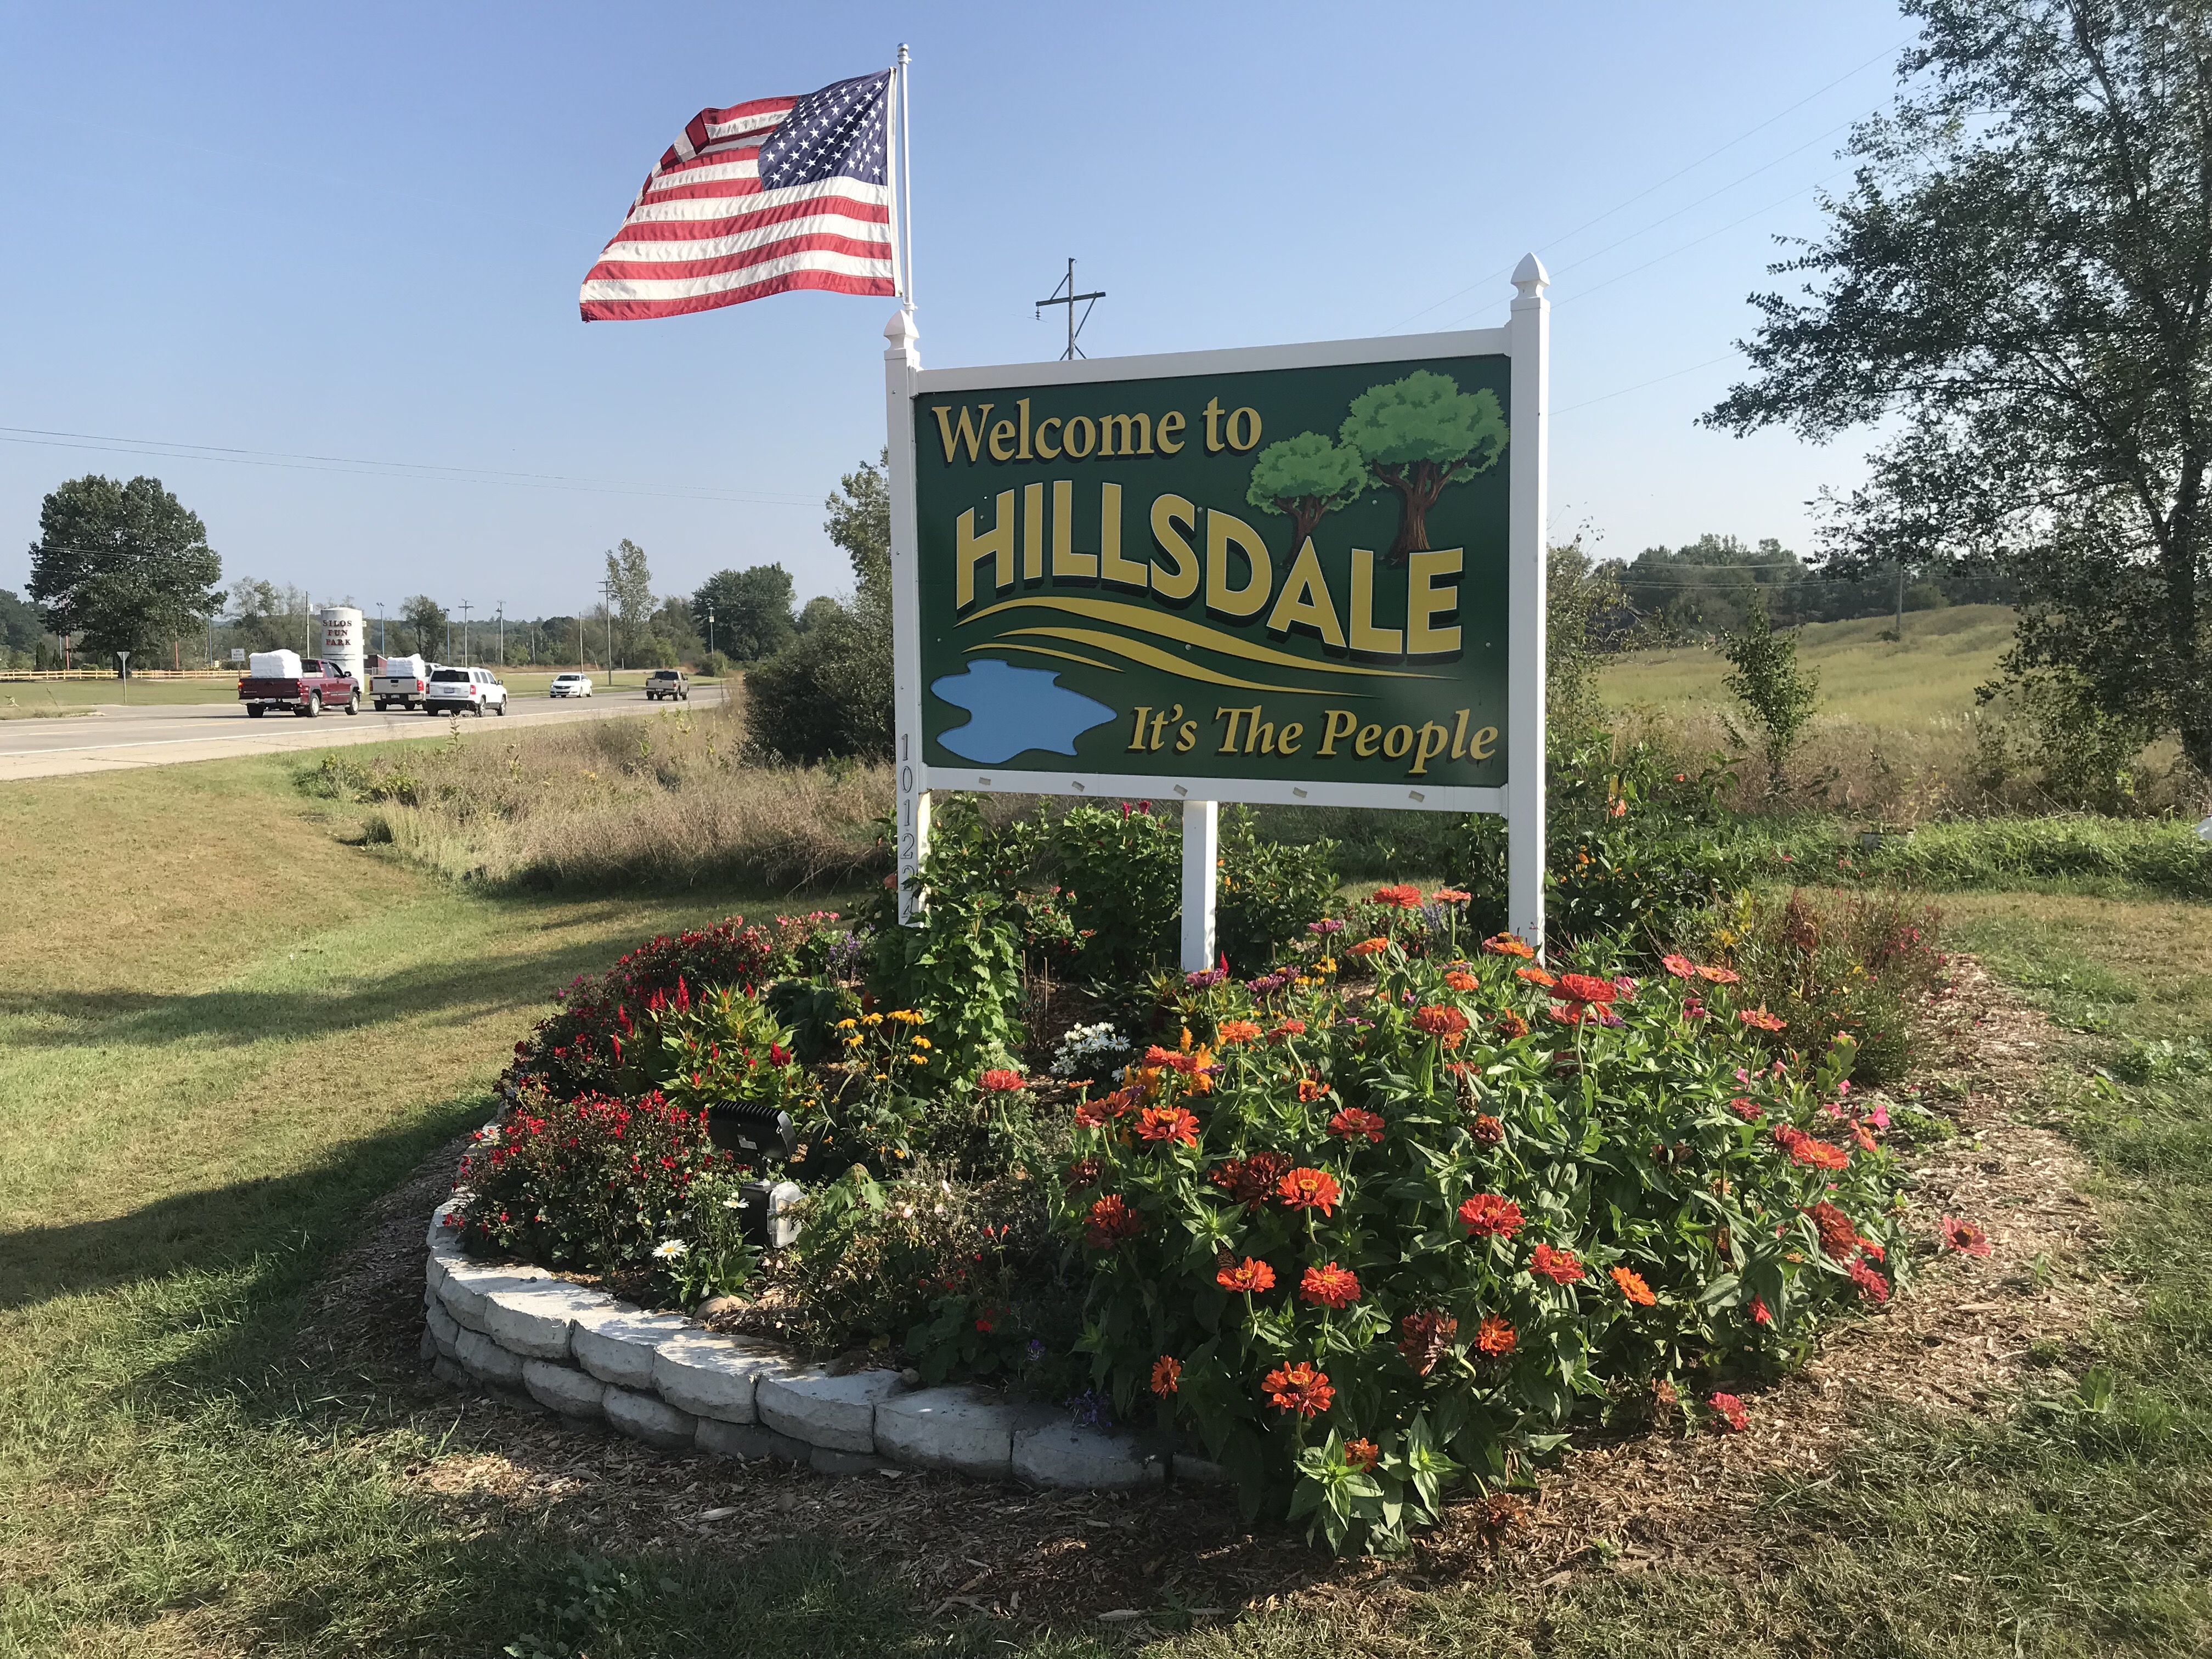 The City of Hillsdale: A ‘strong town’